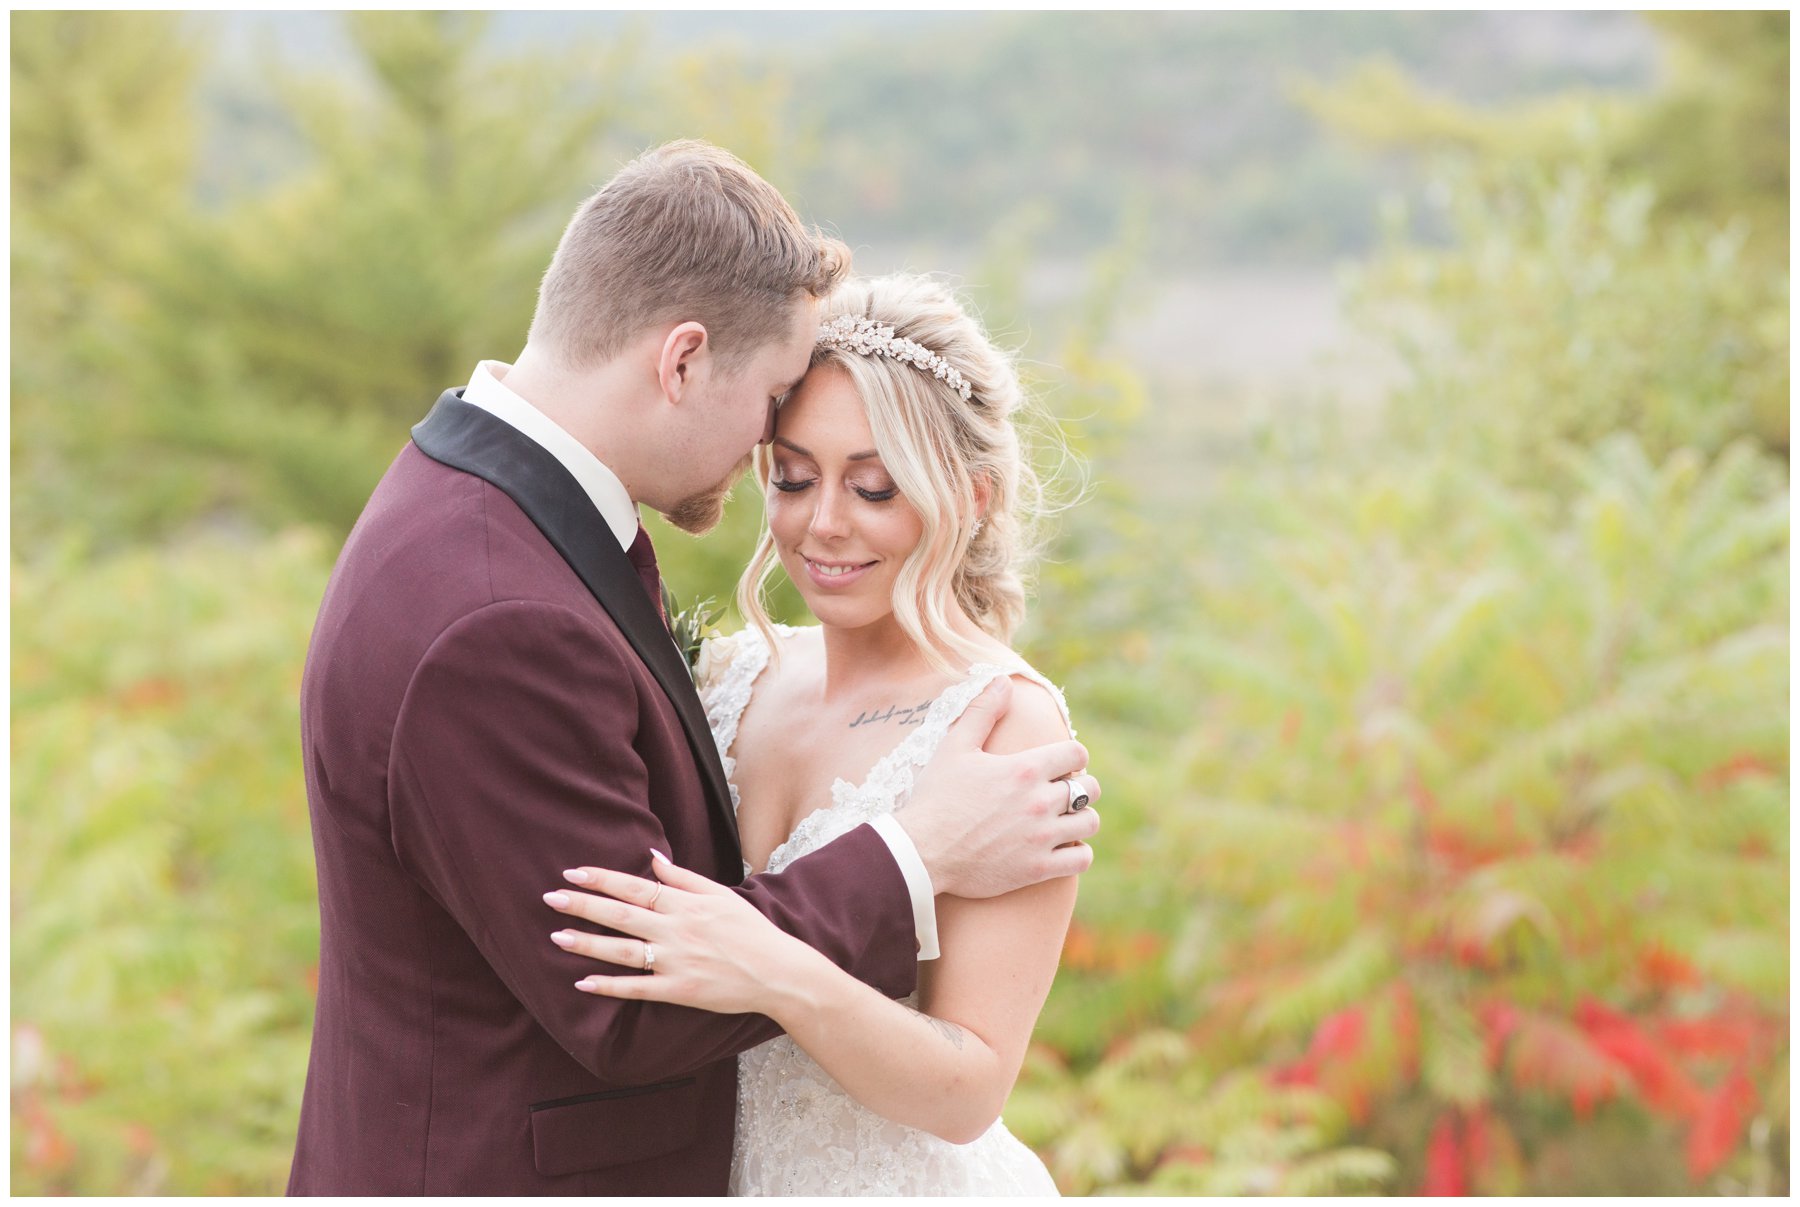 Romanic Fall Wedding at Le Belveder in Wakefield Wedding